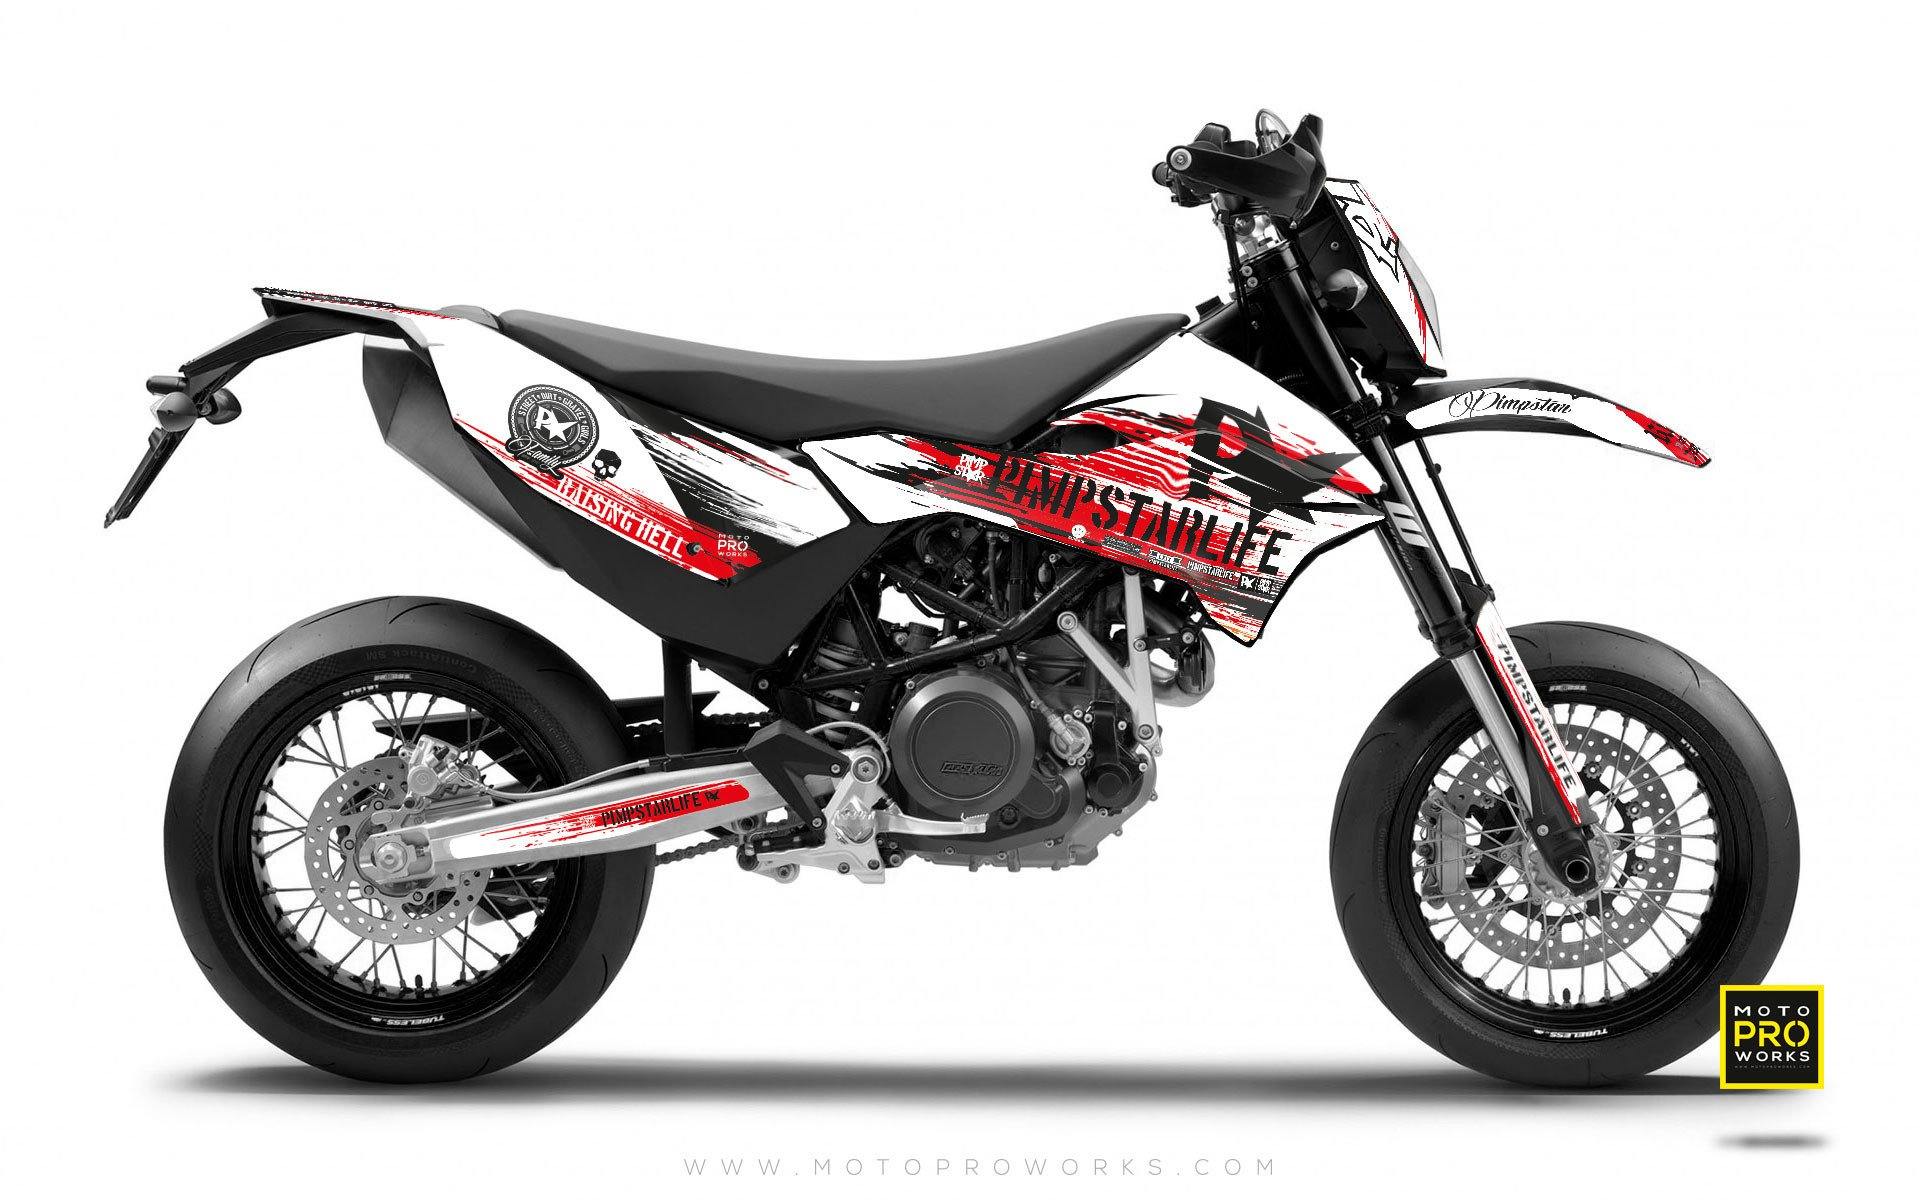 KTM GRAPHIC KIT - Pimpstarlife "HELLION" (red) - MotoProWorks | Decals and Bike Graphic kit